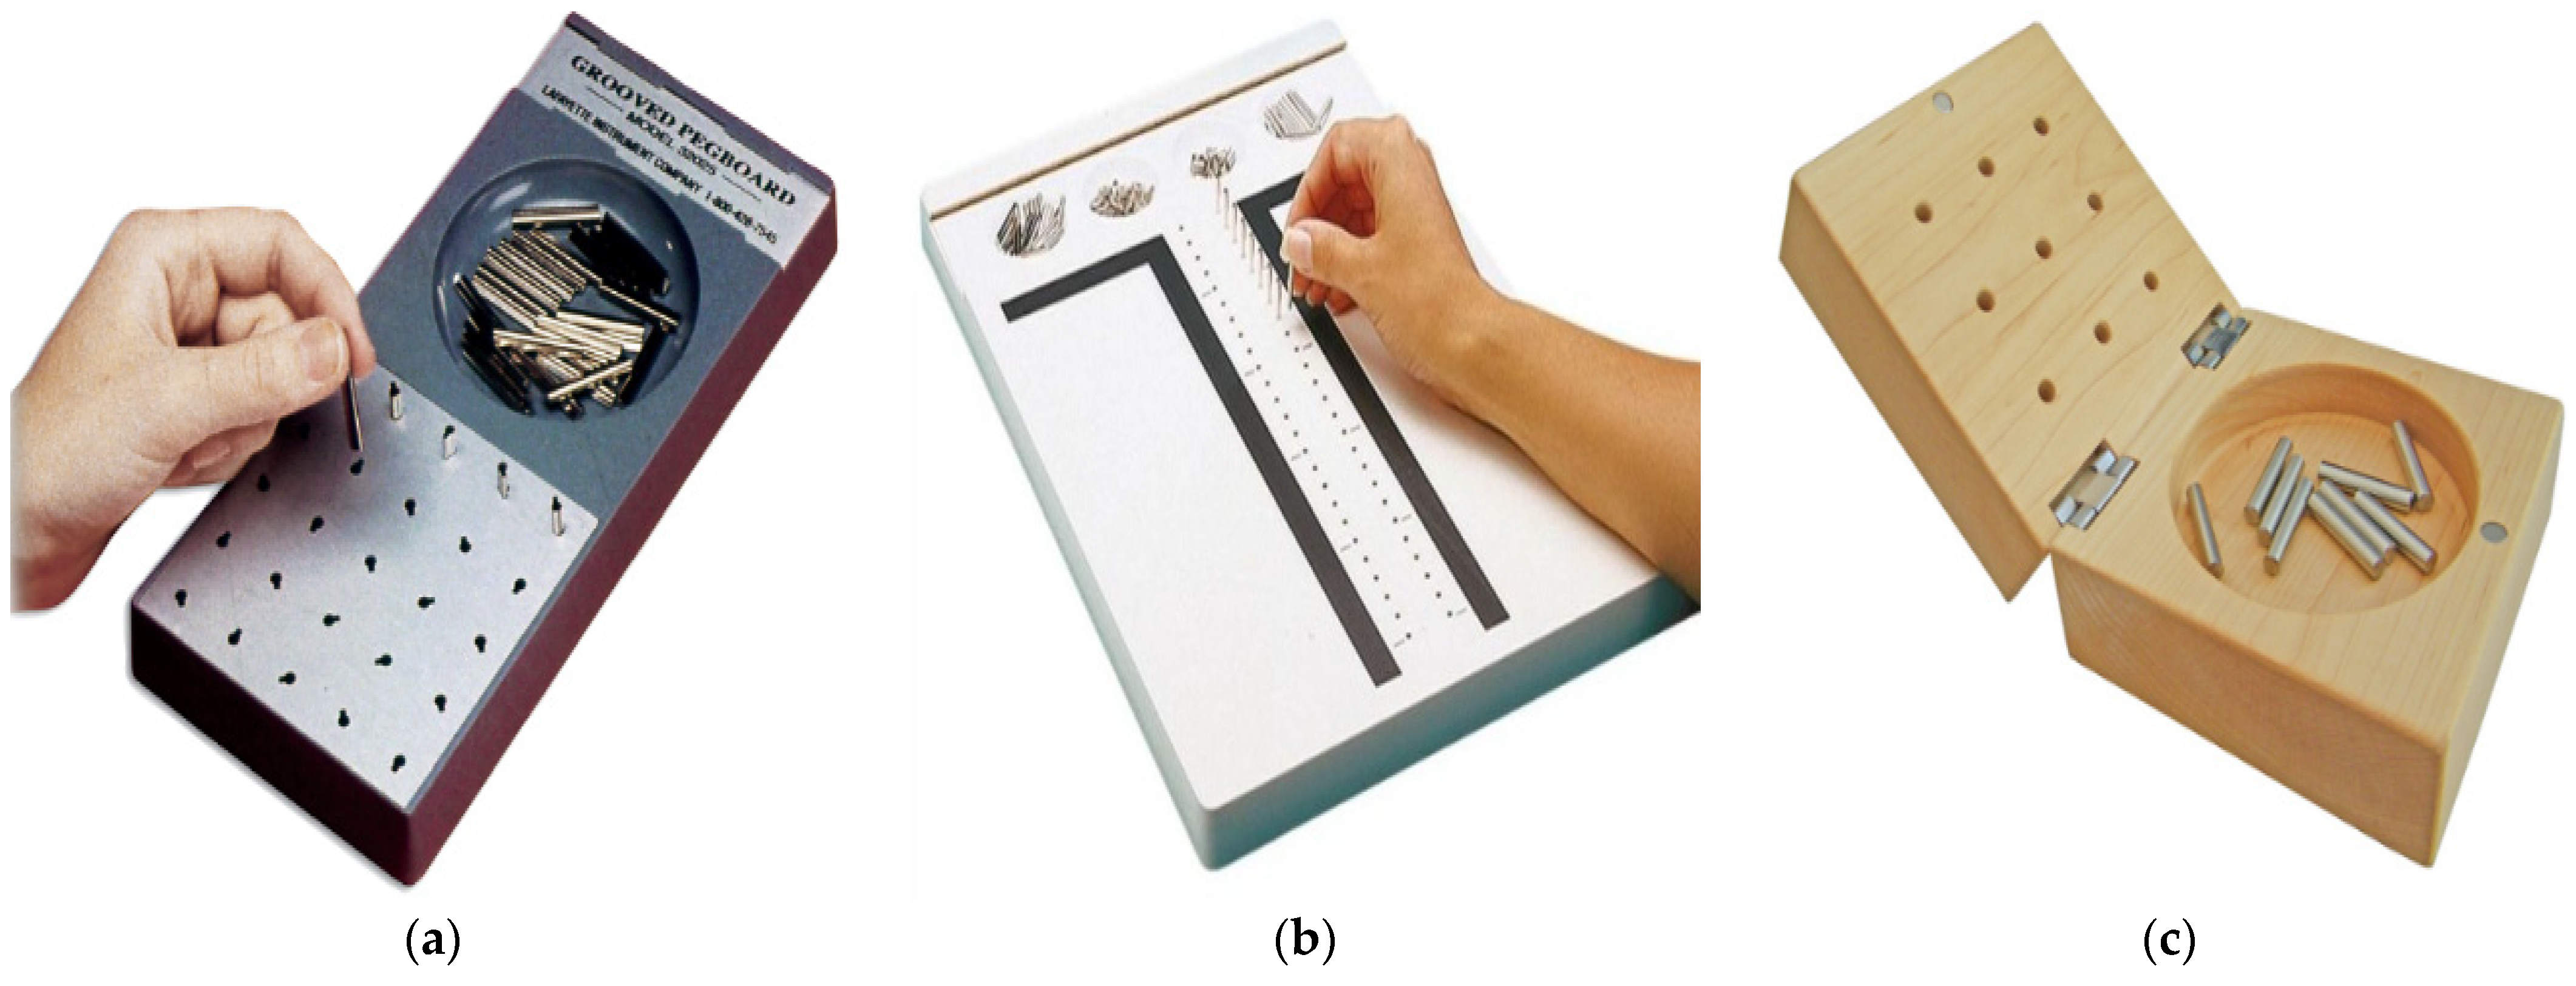 ASI | Free Full-Text | A Prototype of an Electronic Pegboard Test to Measure Hand-Time Dexterity with Impaired Hand